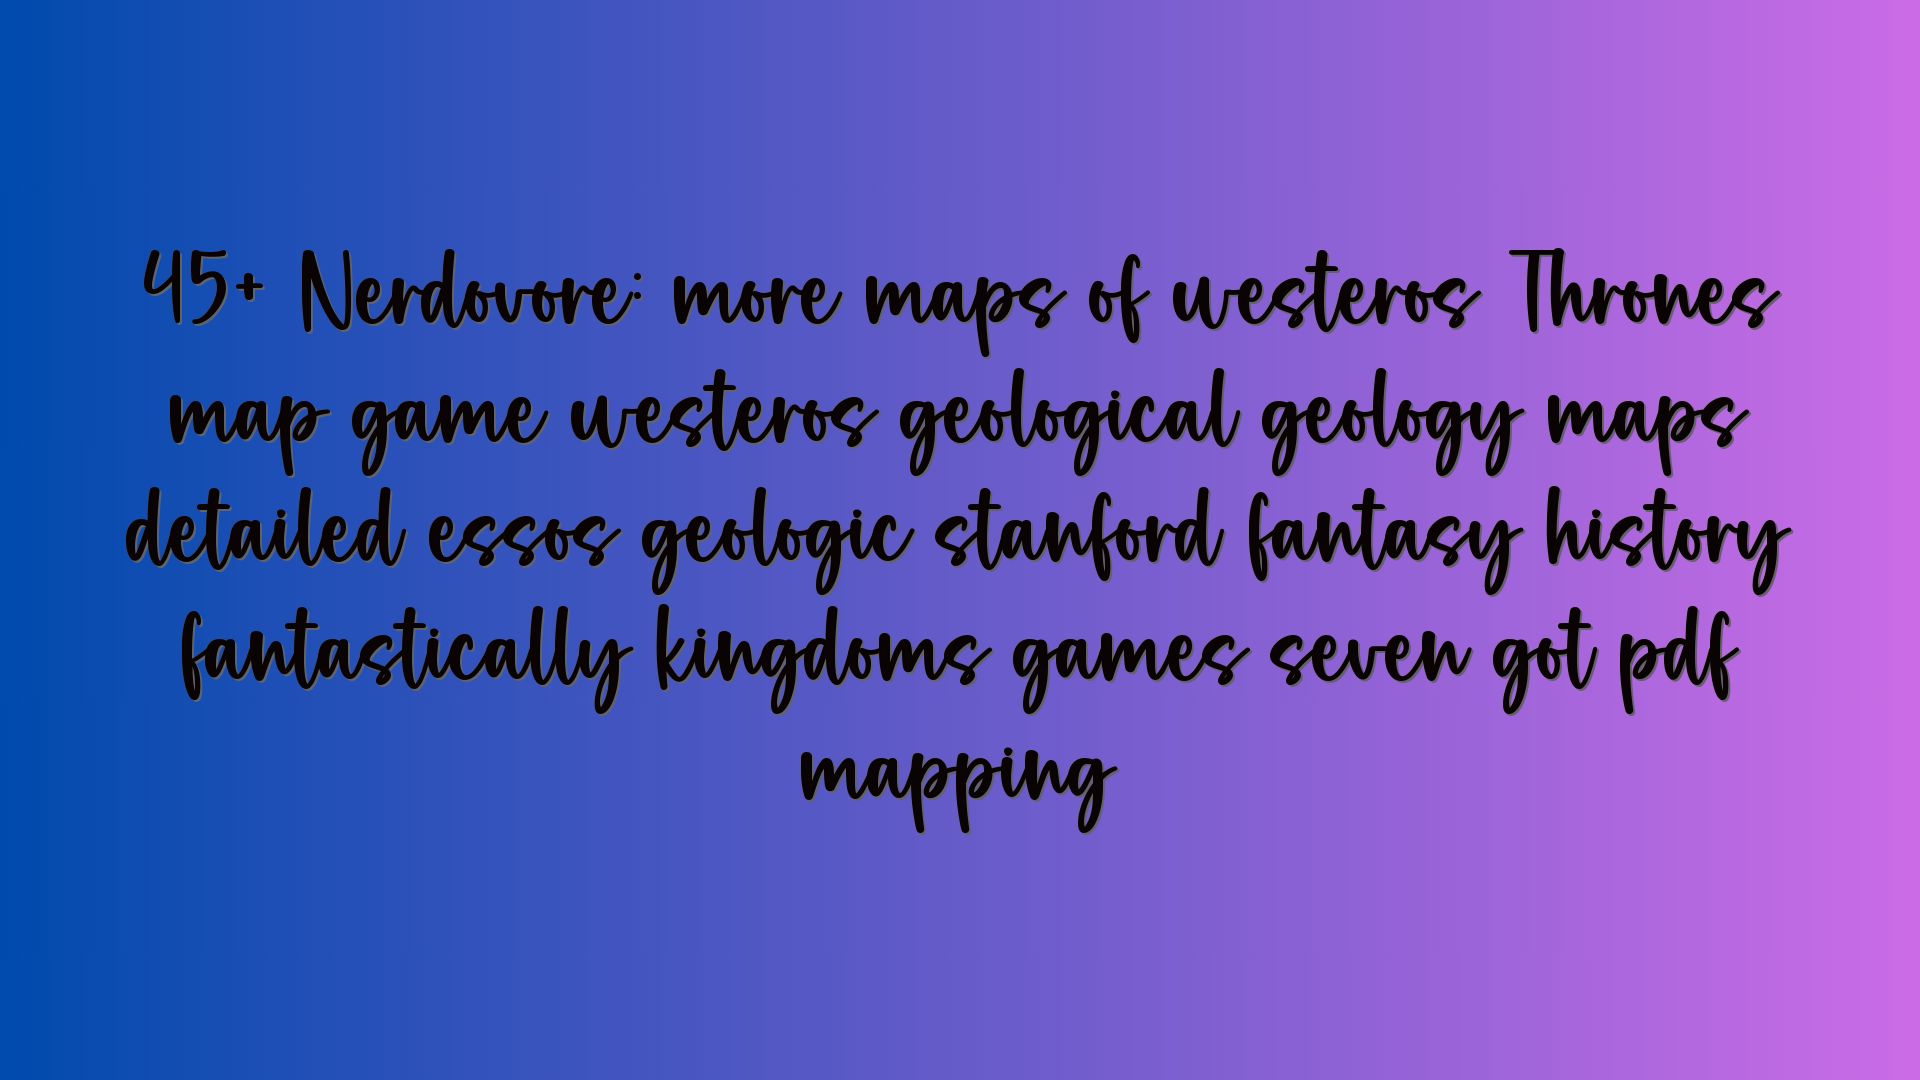 45+ Nerdovore: more maps of westeros Thrones map game westeros geological geology maps detailed essos geologic stanford fantasy history fantastically kingdoms games seven got pdf mapping